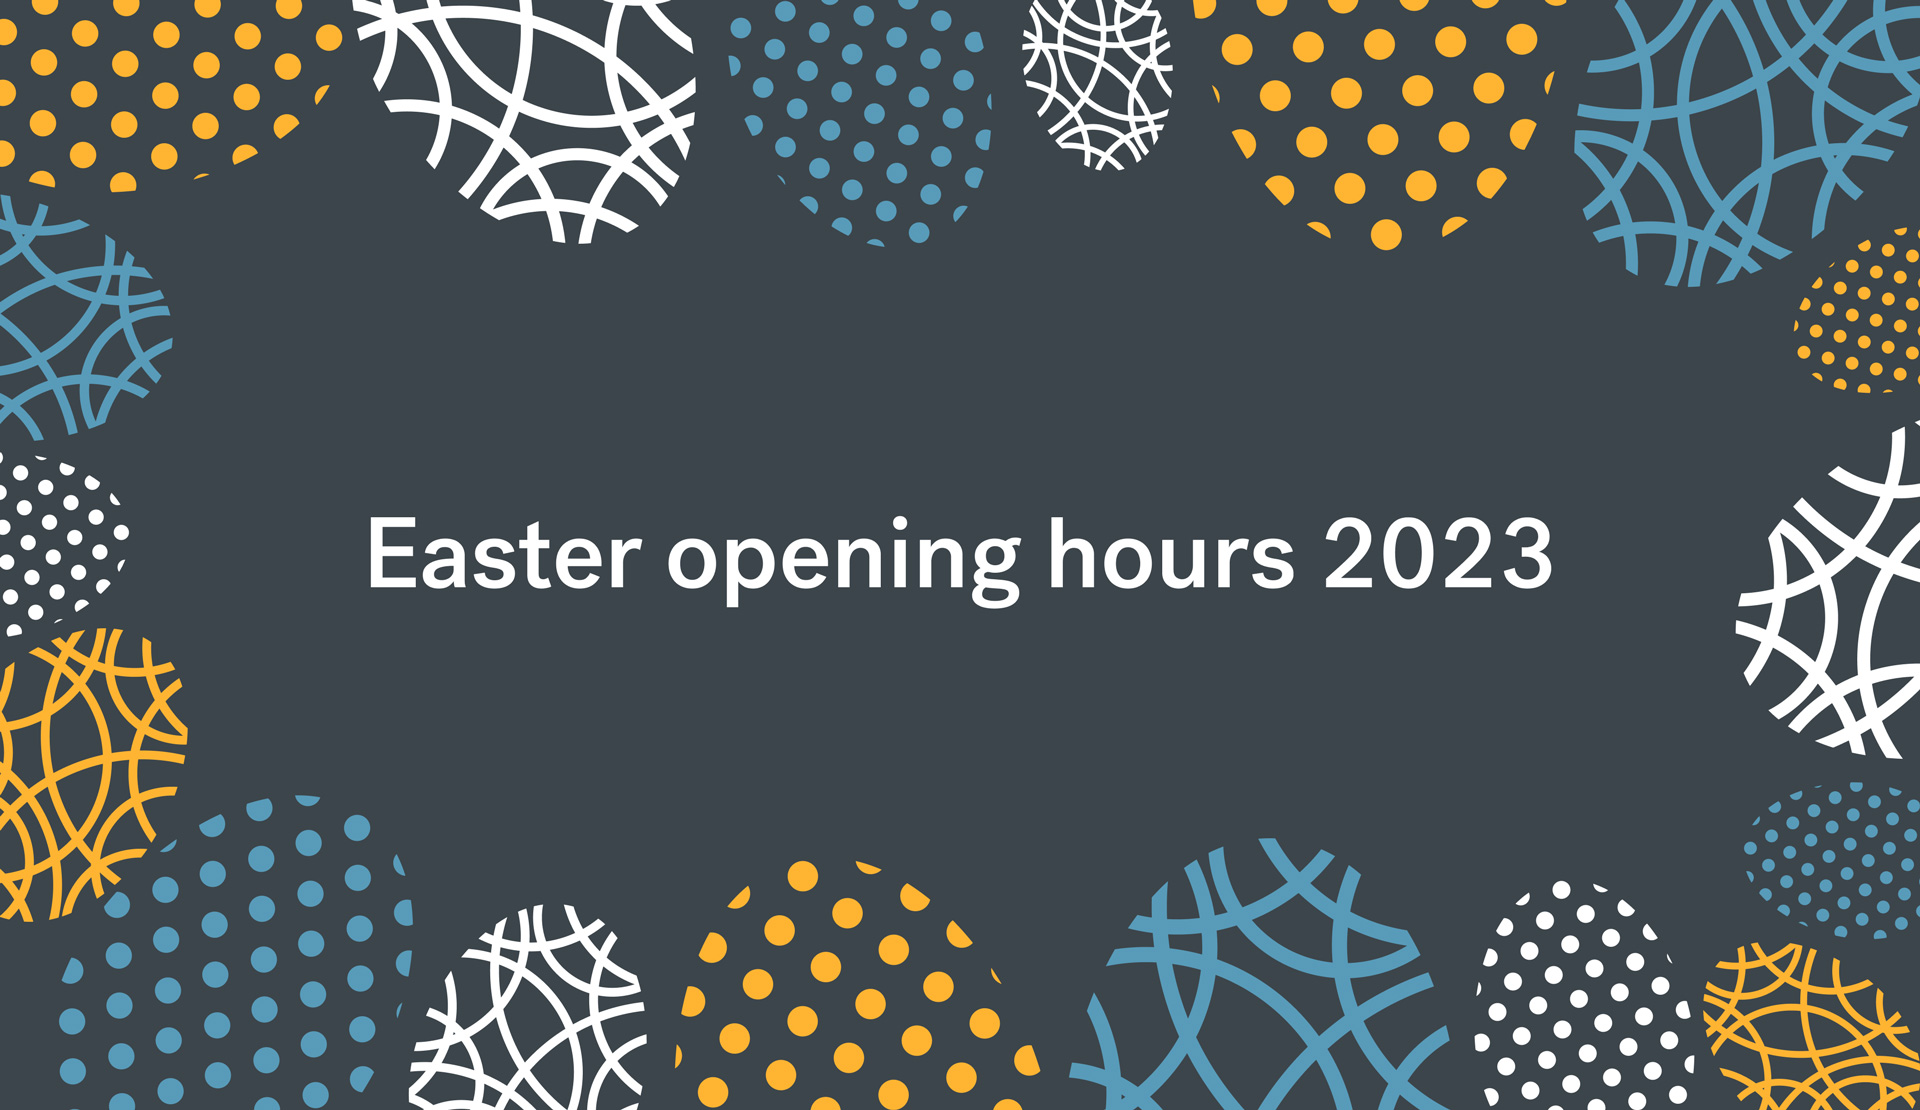 2023 Easter opening hours: markets and customer experience